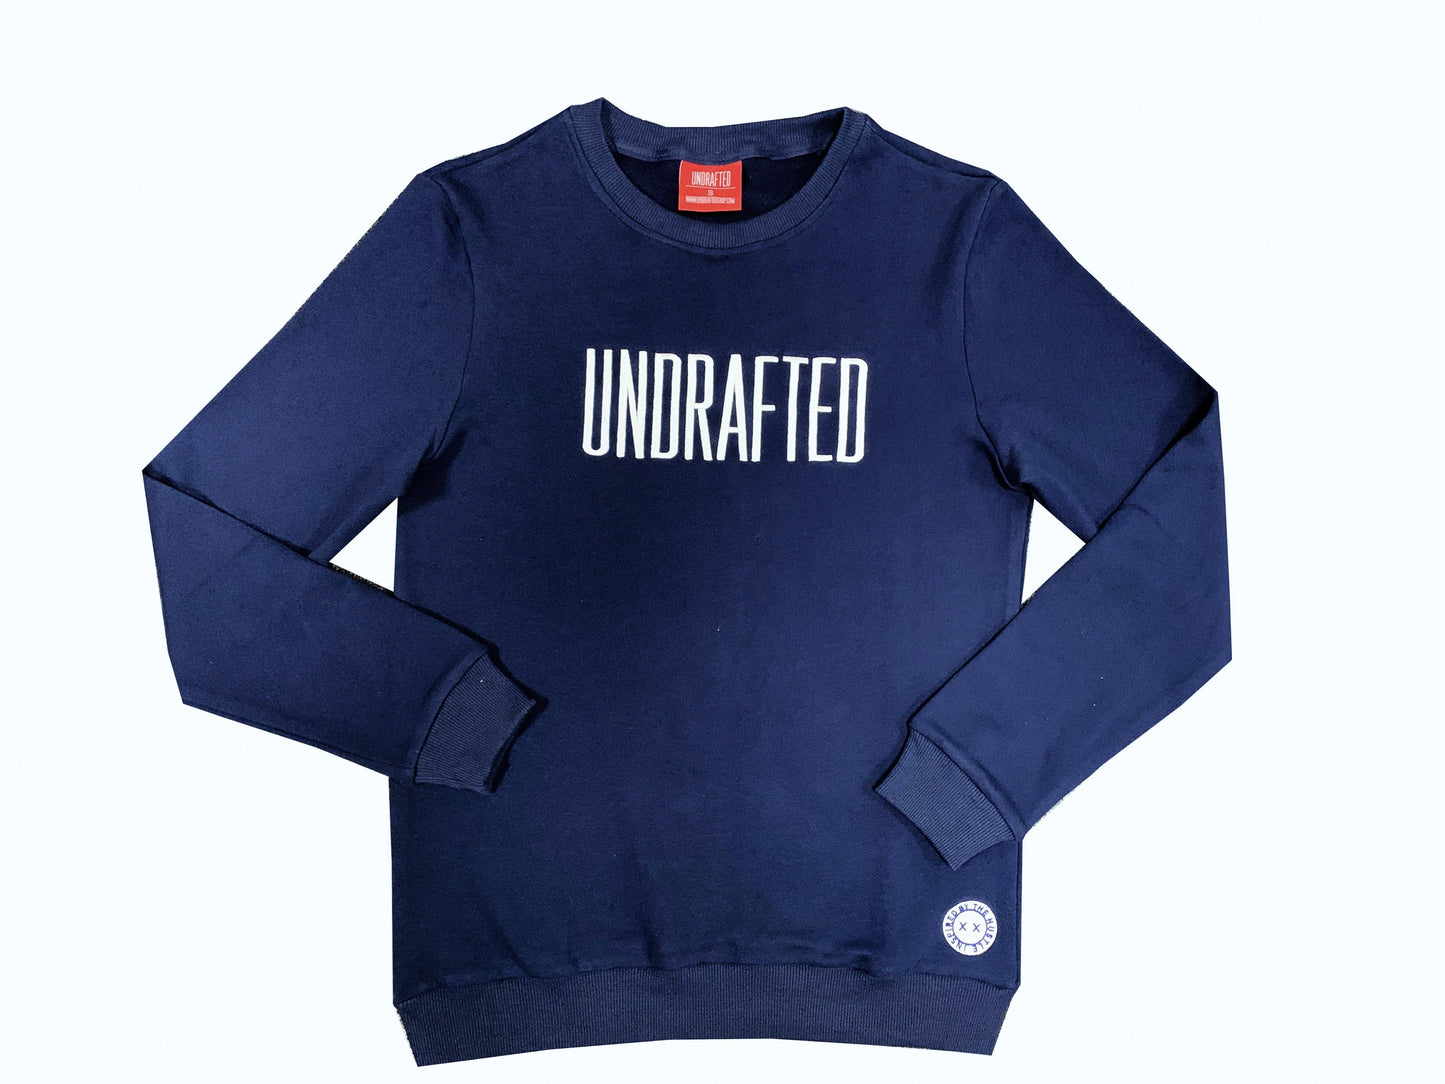 Embroidered Undrafted Sweatshirt Navy Blue/White*